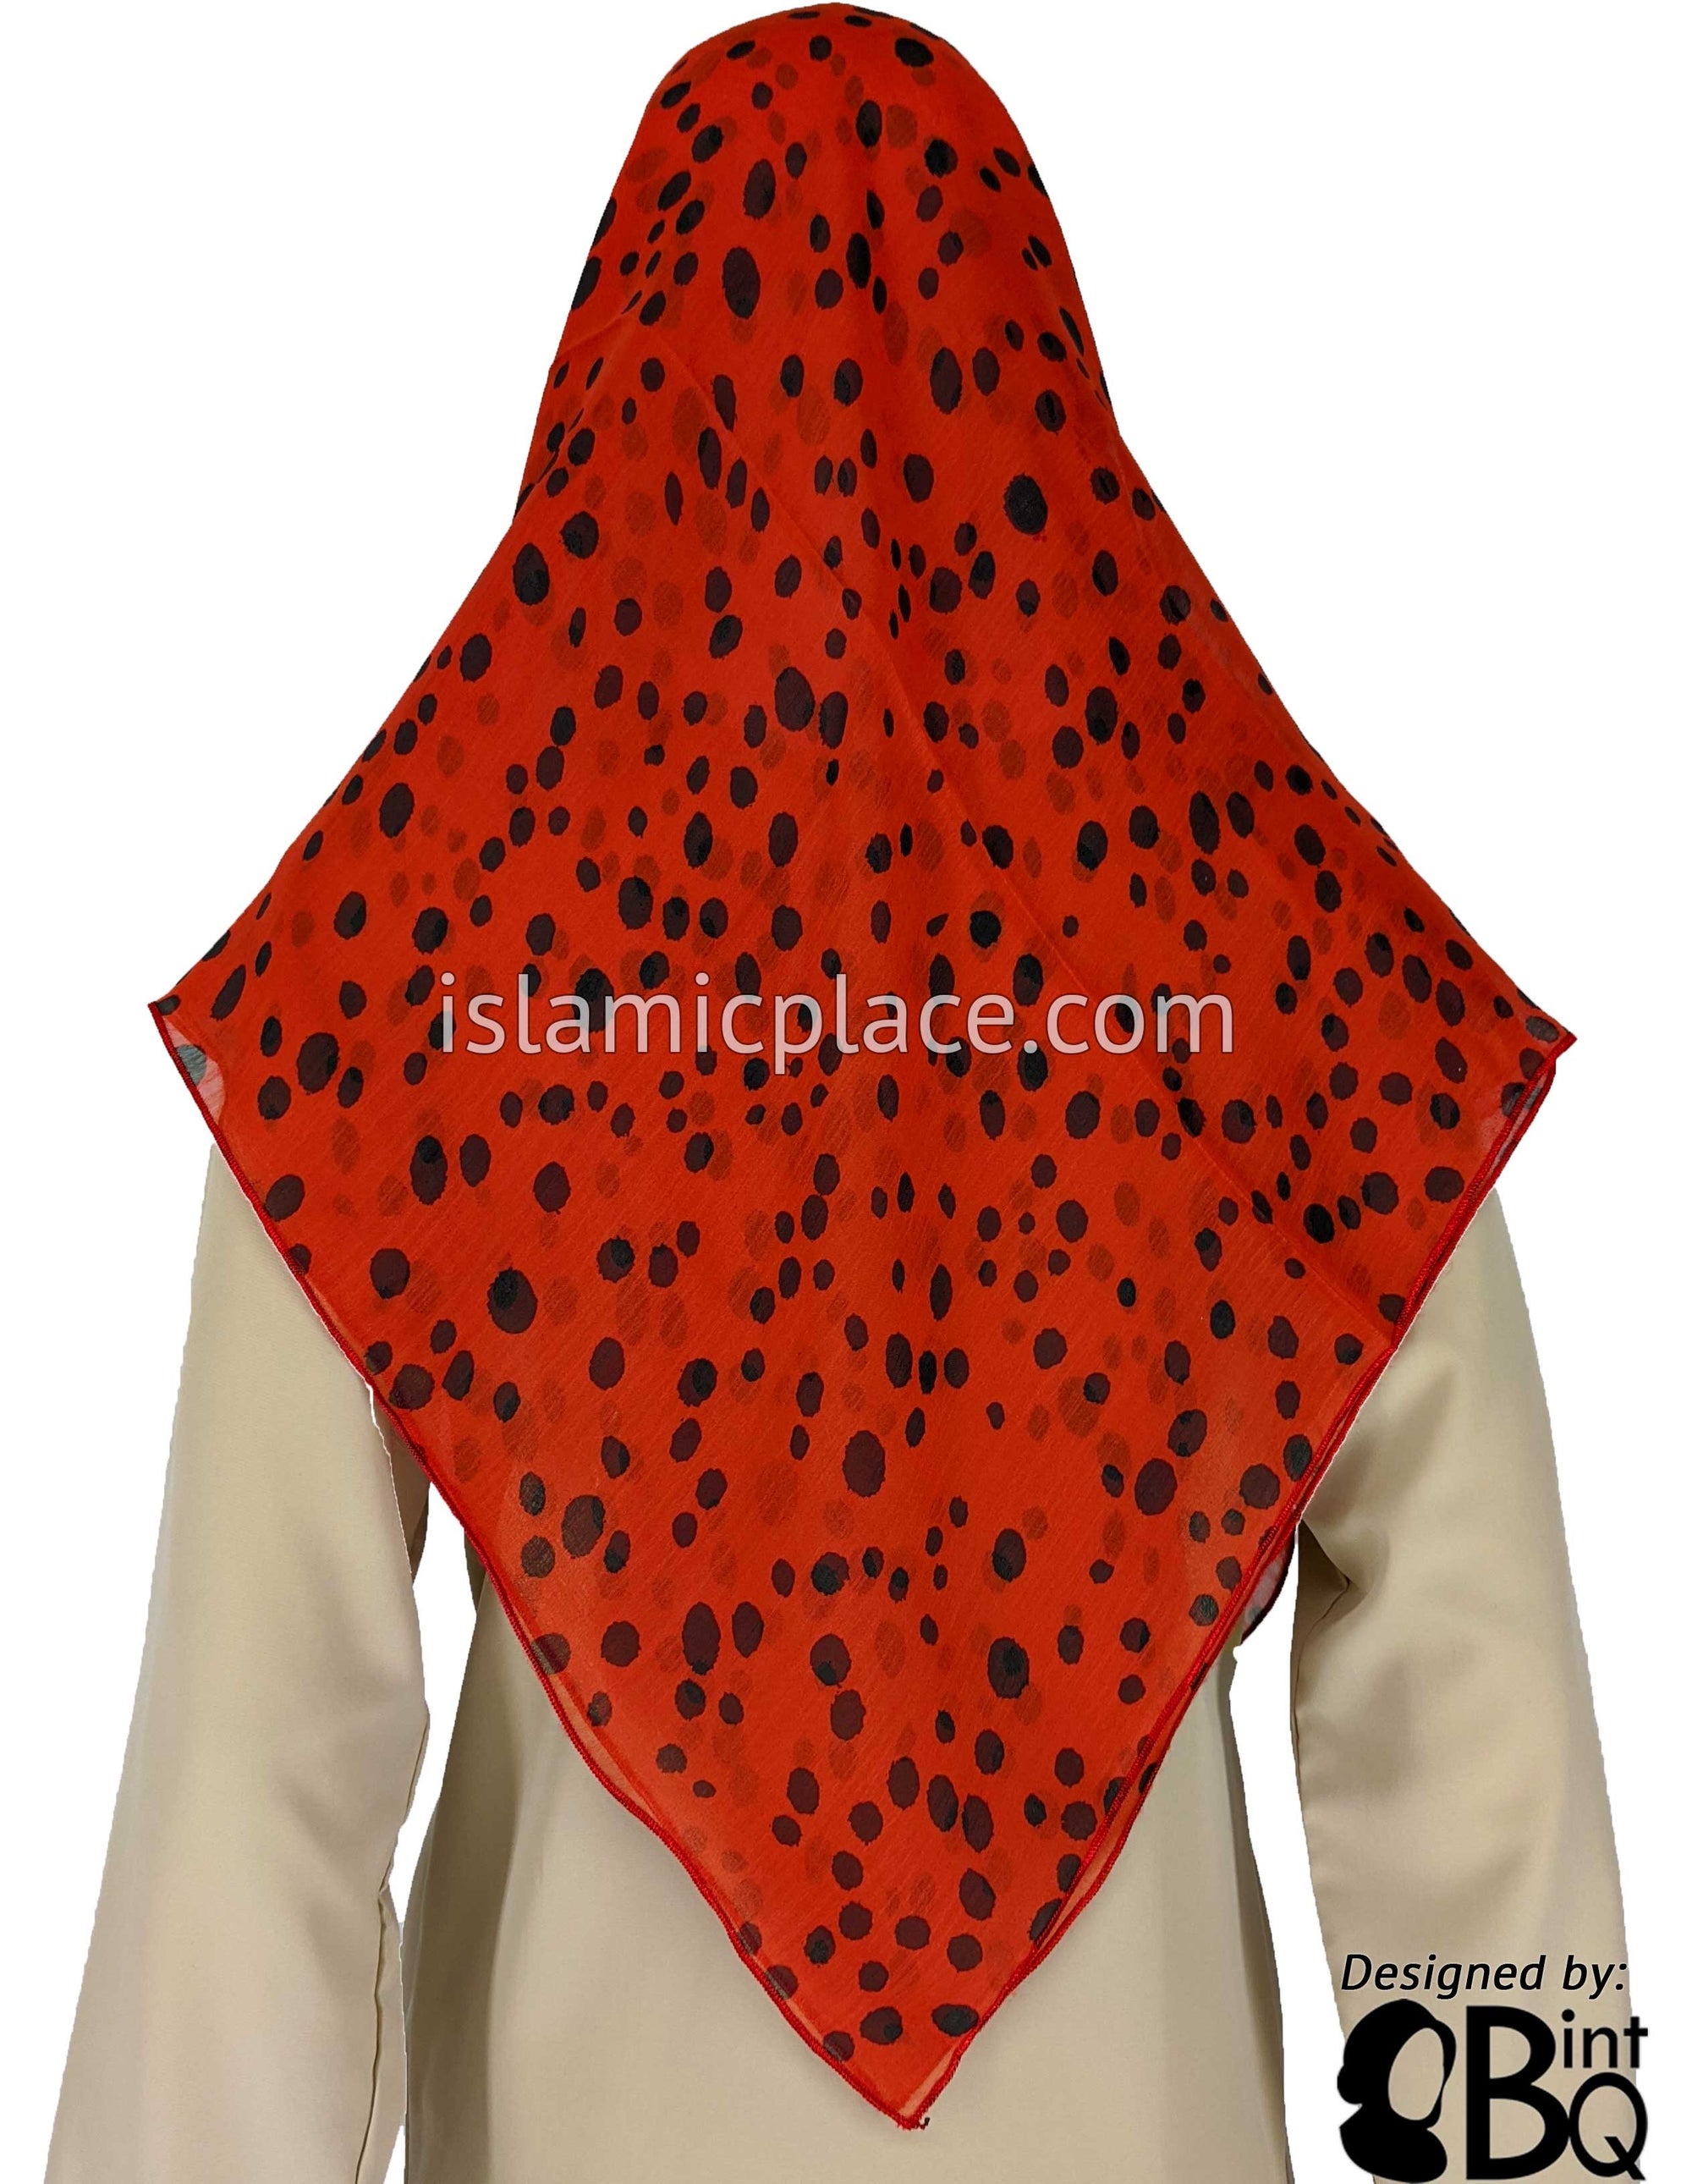 Crimson Red with Black Spots Inspired by Cheetah Print - 45" Square Printed Khimar